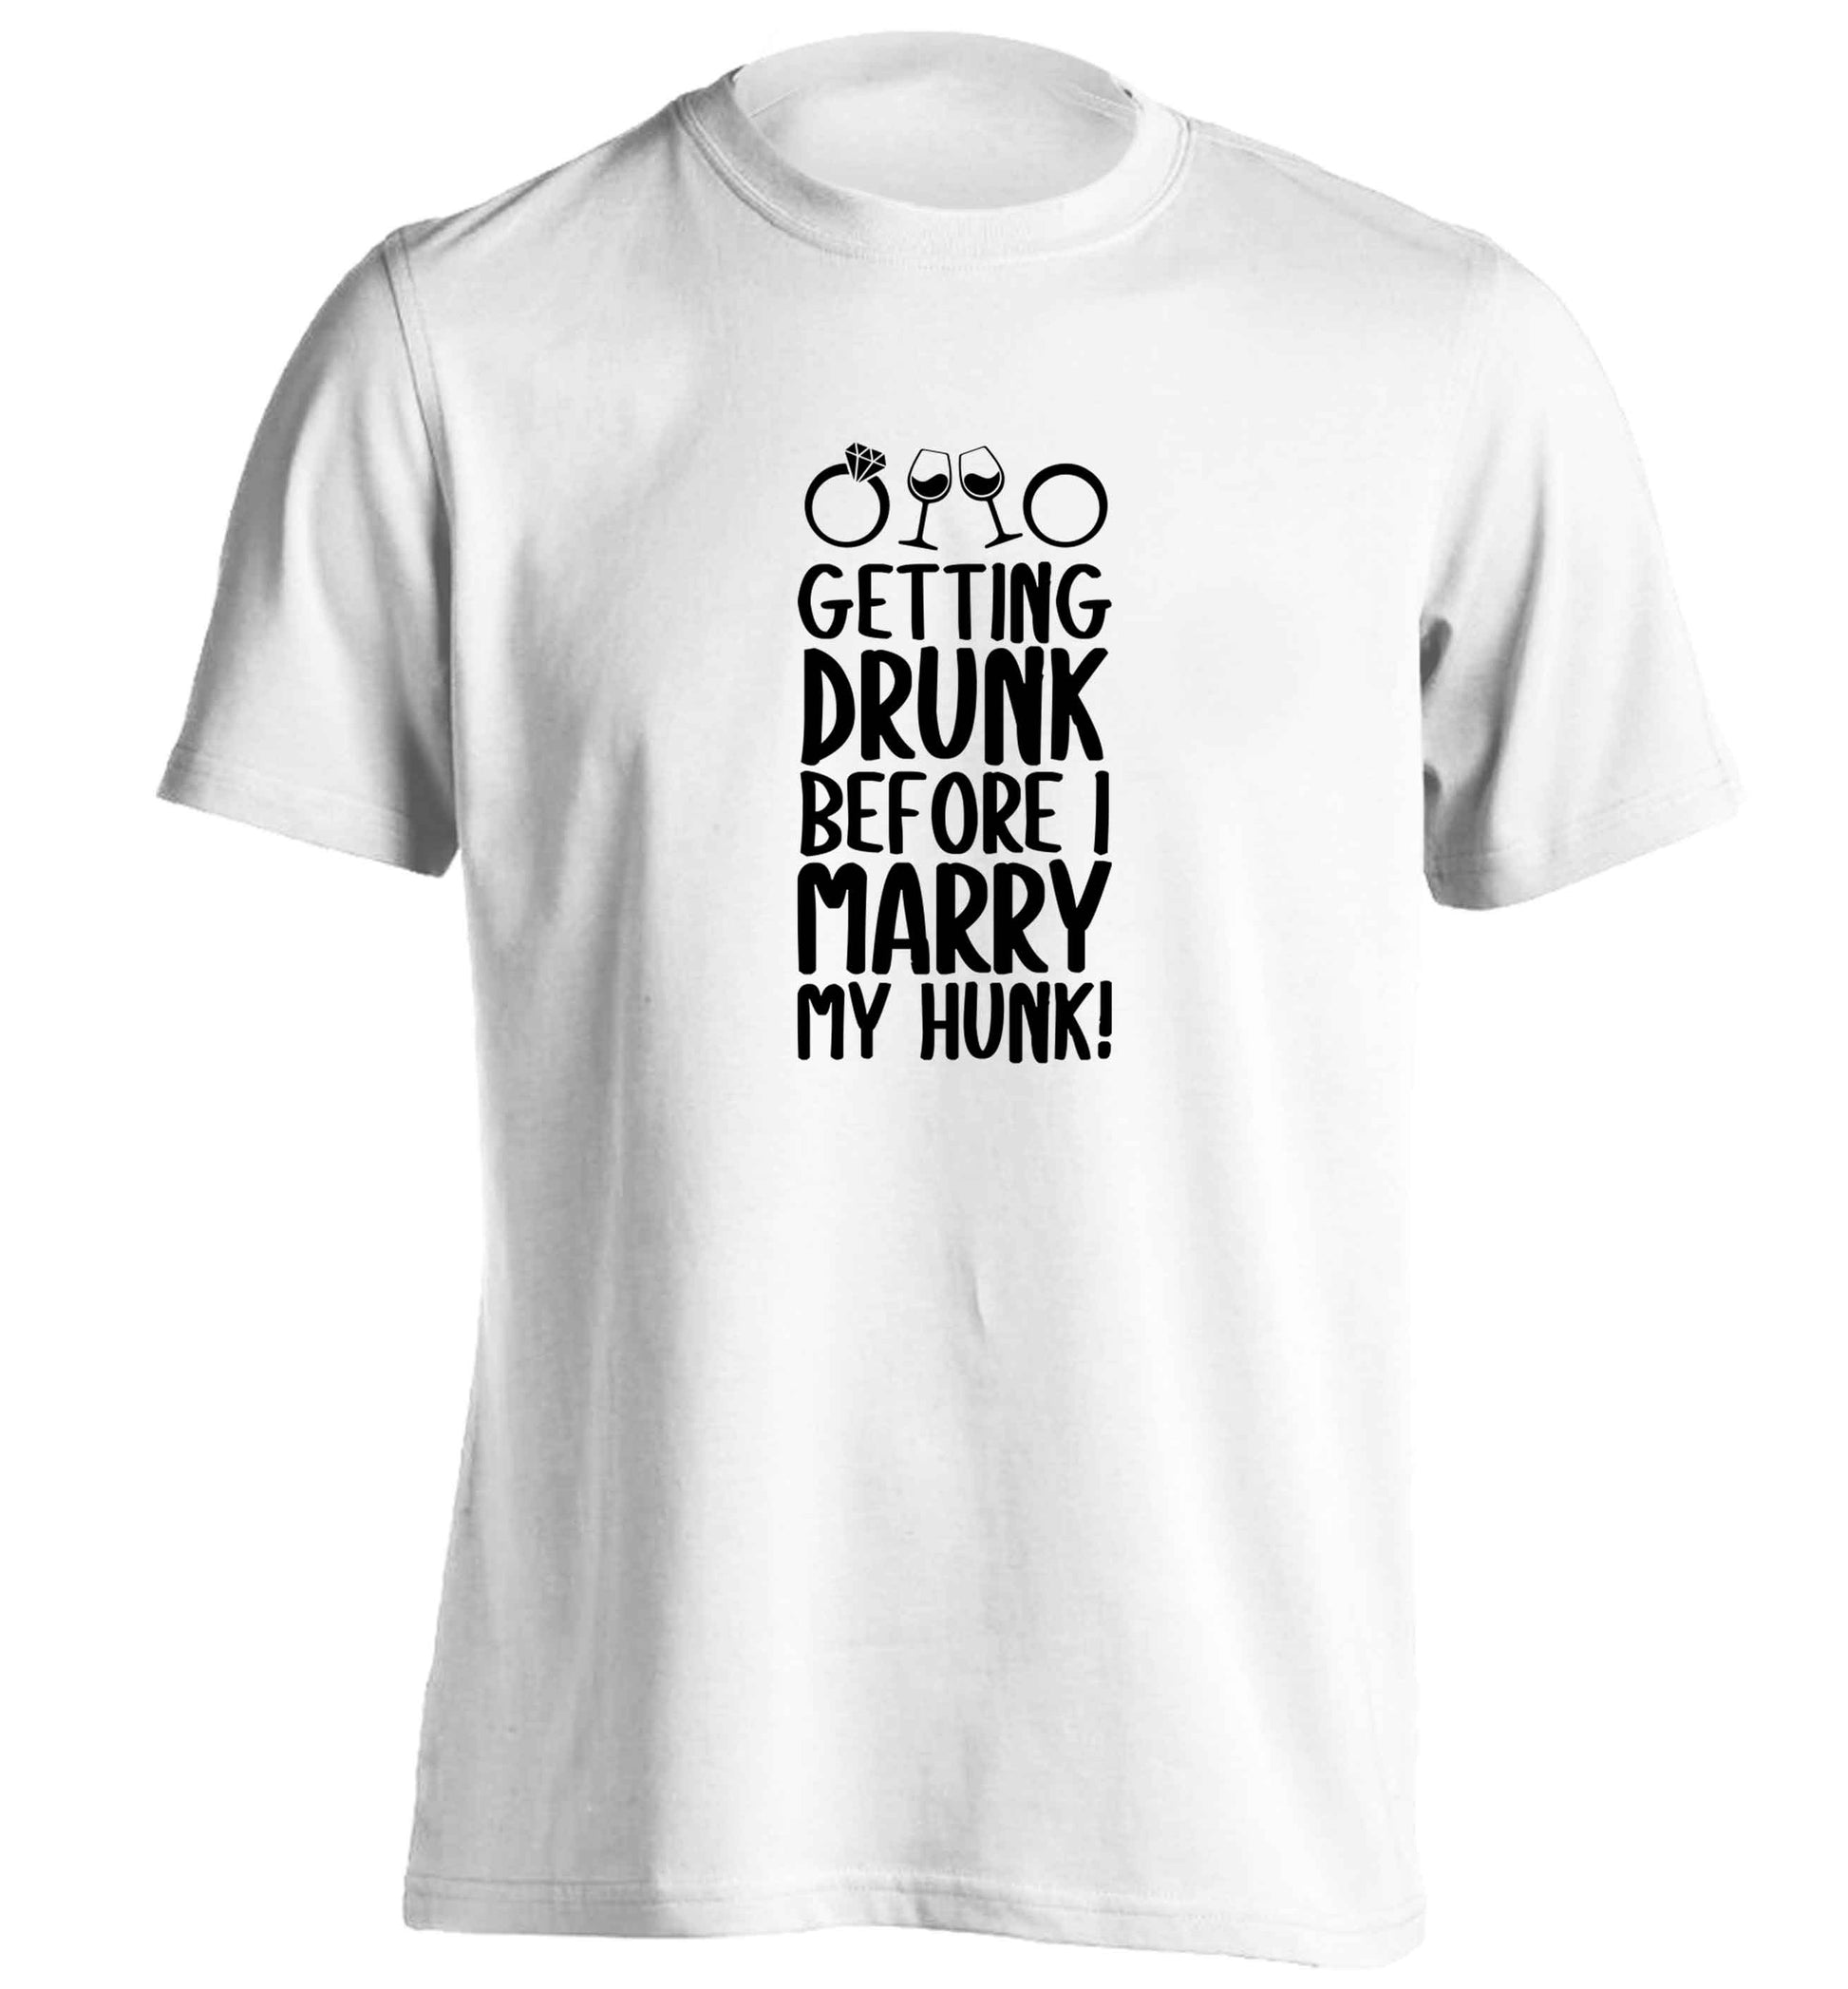 Getting drunk before I marry my hunk adults unisex white Tshirt 2XL